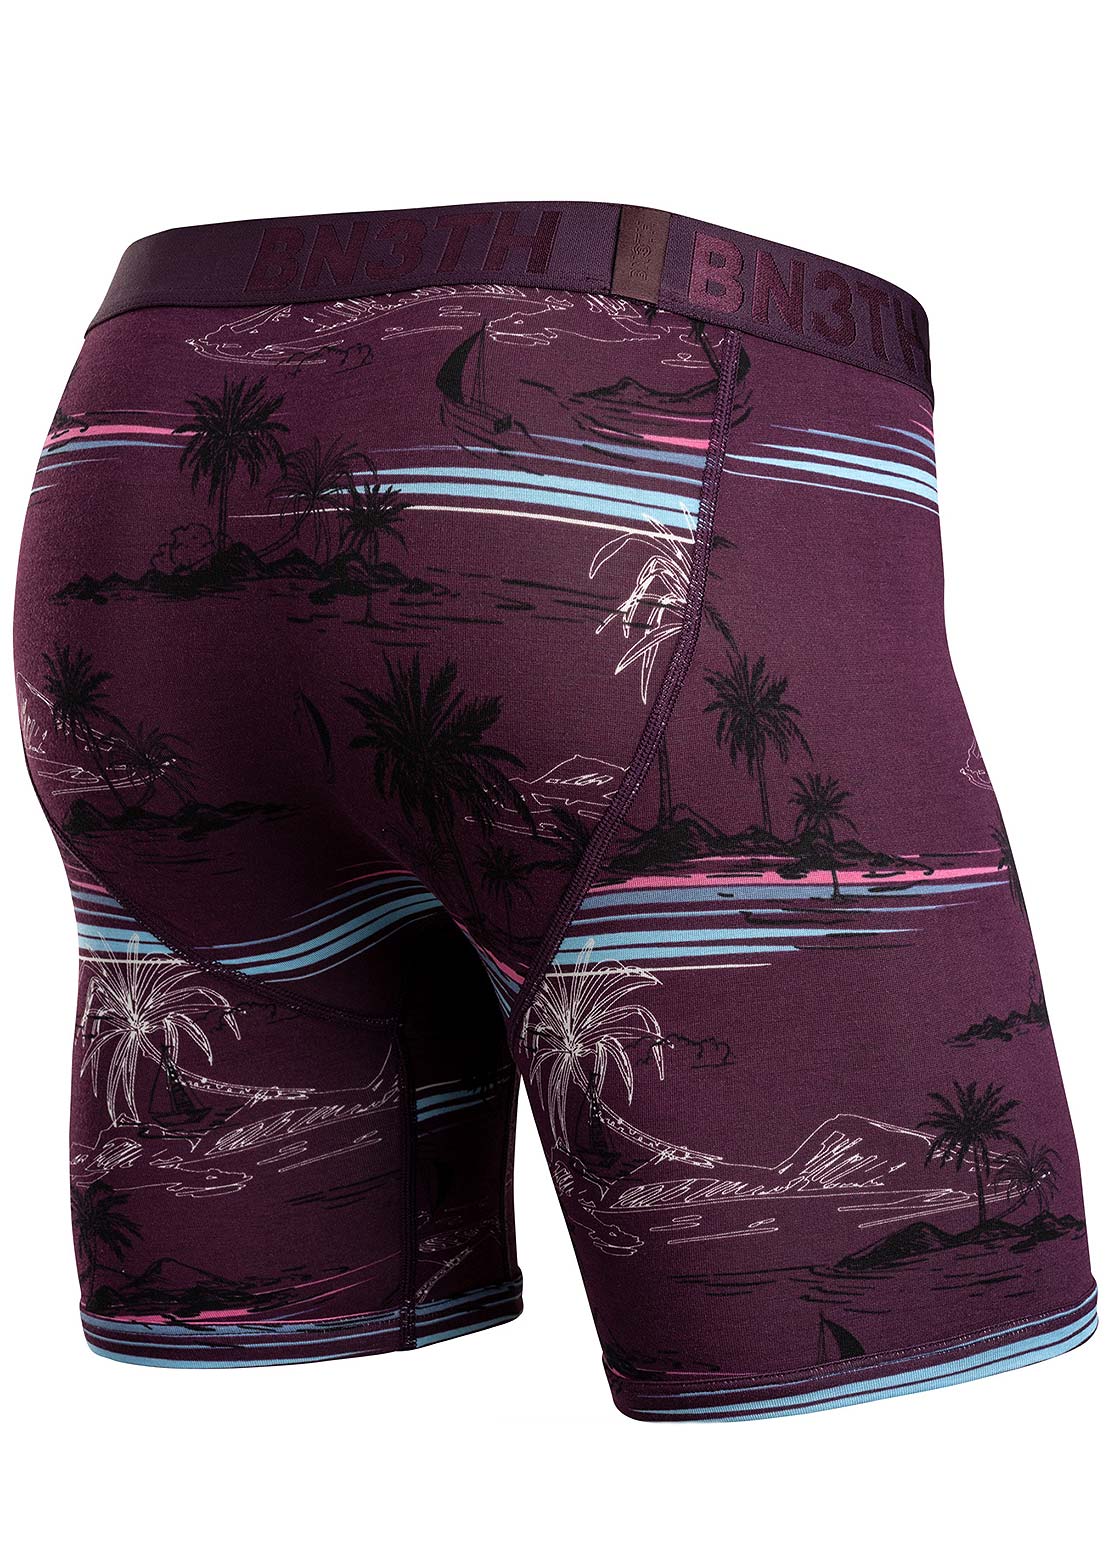  BN3TH Men&#39;s Classic Brief Print Boxers Take Me There/Cabernet